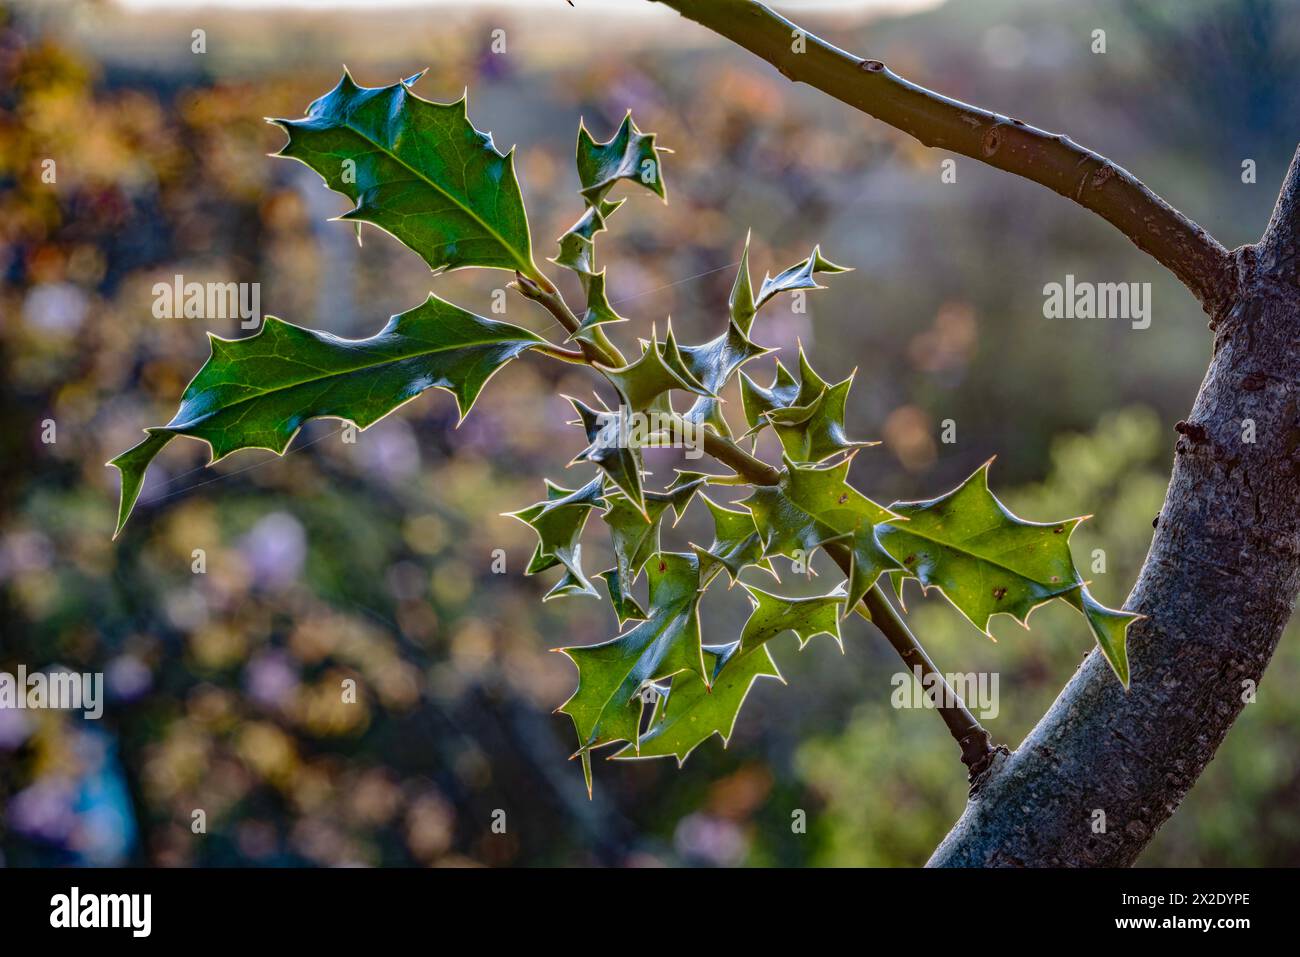 Young holly branch in garden with sun from behind showing complex leaf patterns. Stock Photo